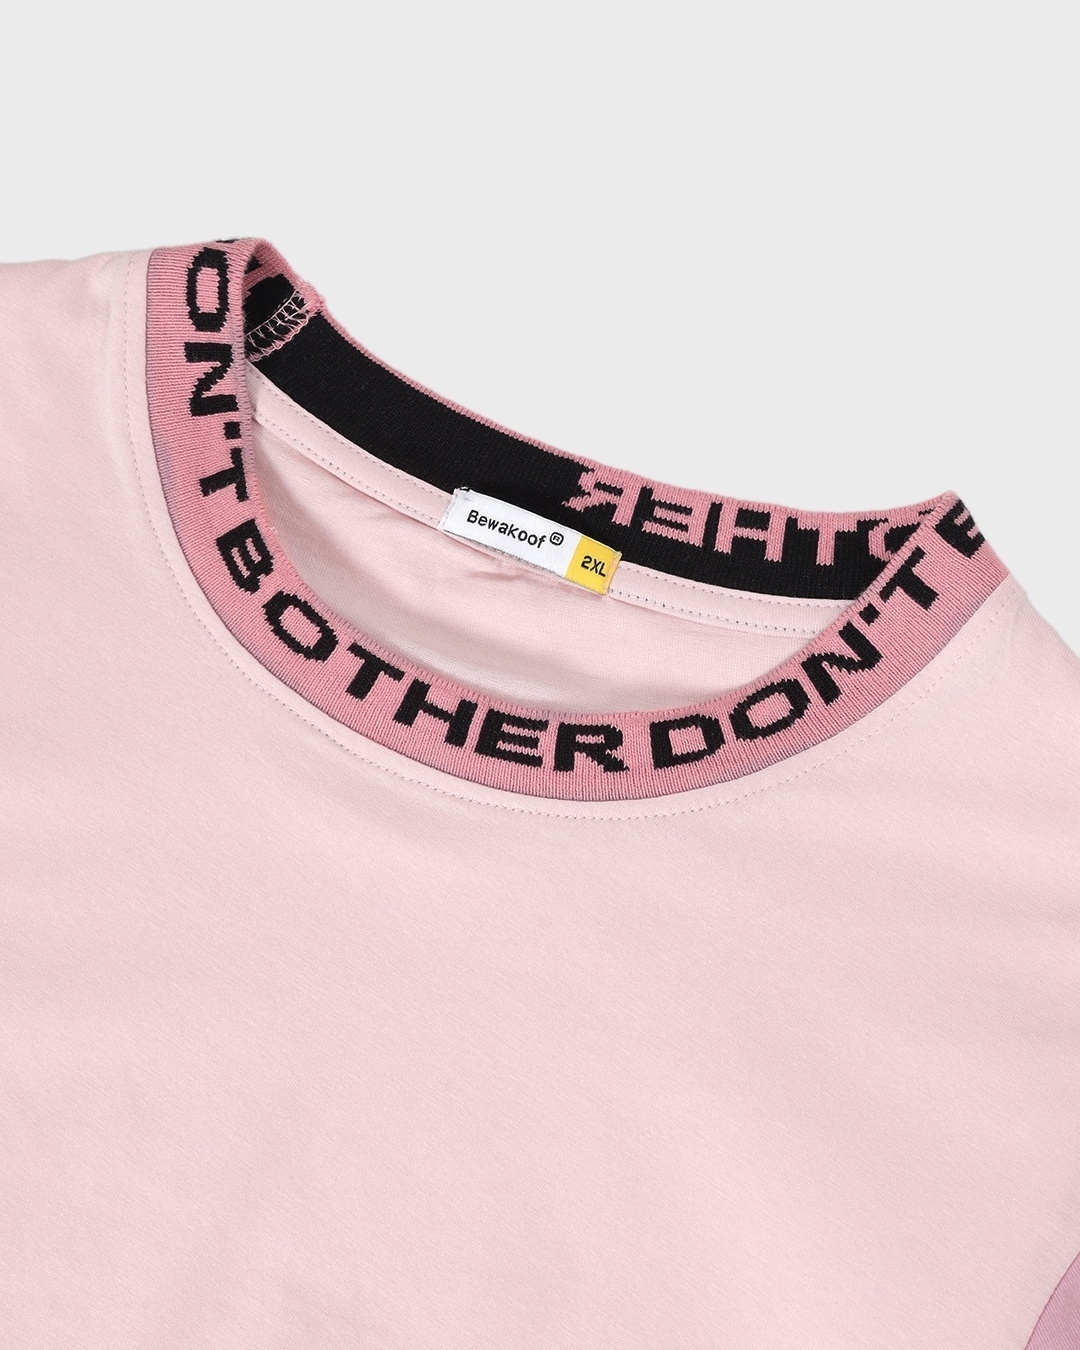 Shop Women's Cheeky Pink Don't Bother Typography Plus Size T-shirt